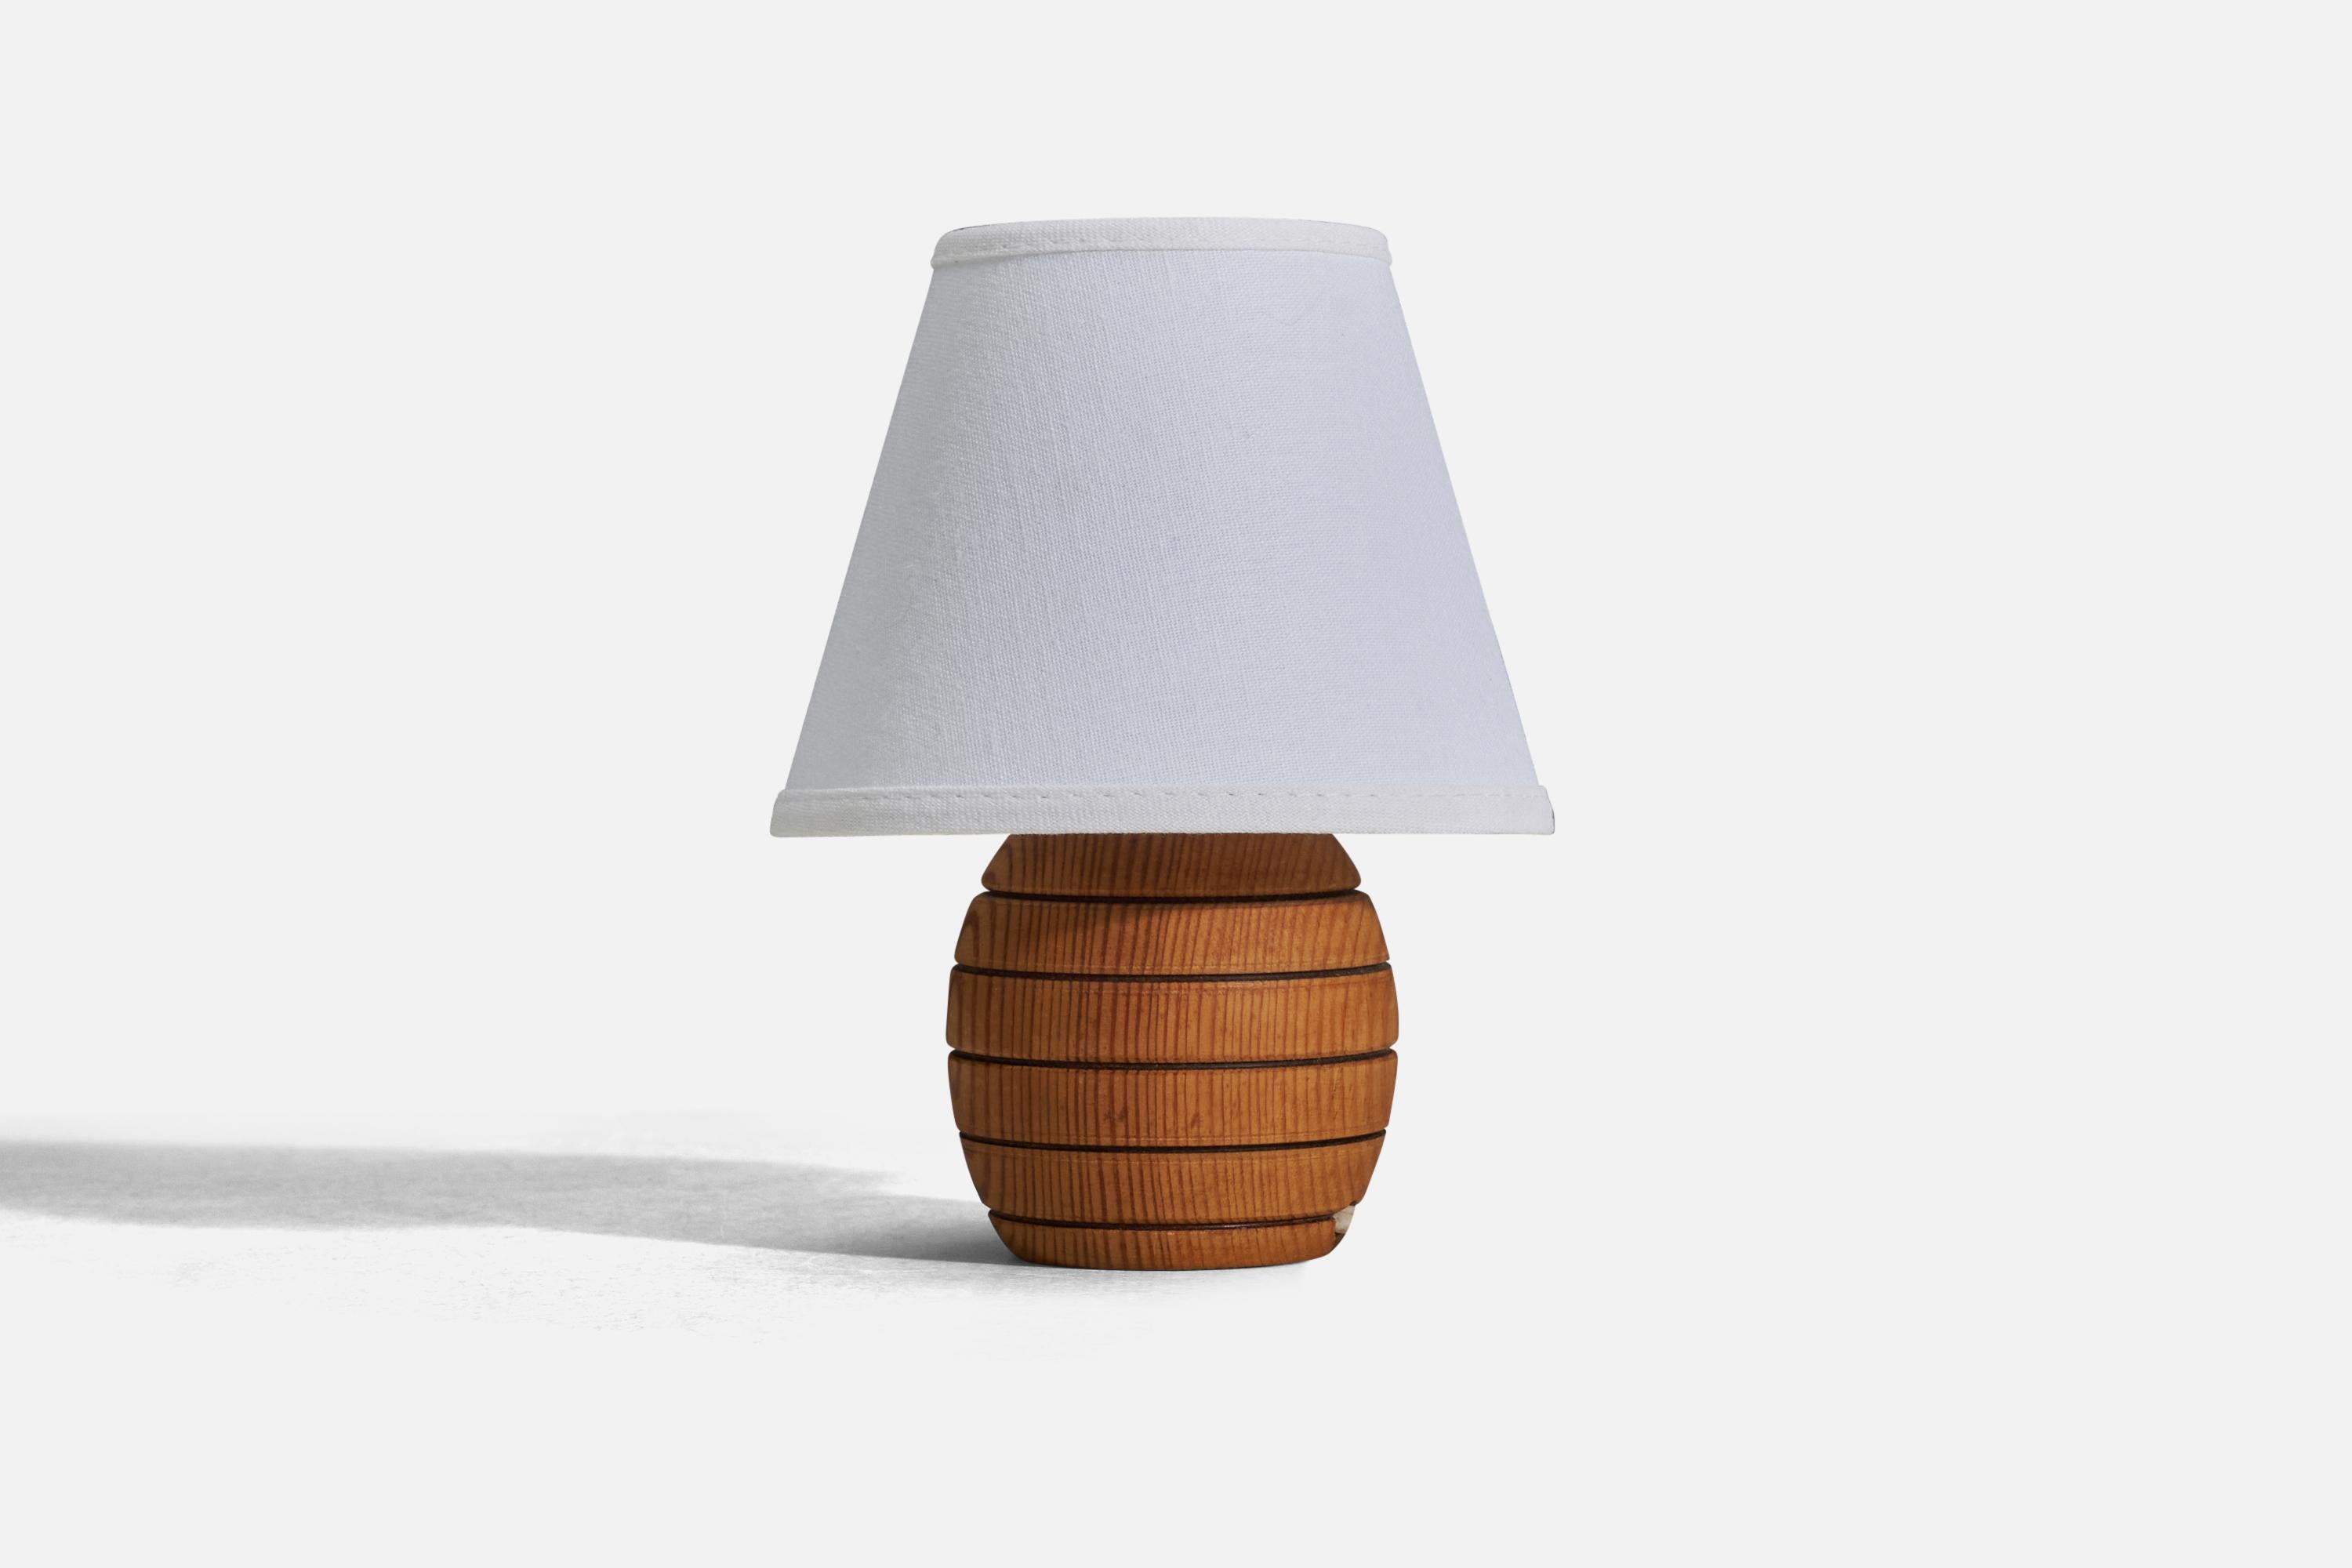 A pine table lamp designed and produced in Sweden, 1970s. 

Sold without Lampshade
Dimensions of Lamp (inches) : 4.75 x 3.35 x 3.35 (Height x Width x Depth)
Dimensions of Lampshade (inches) : 3.25 x 5.75 x 4.5 (Top Diameter x Bottom Diameter x